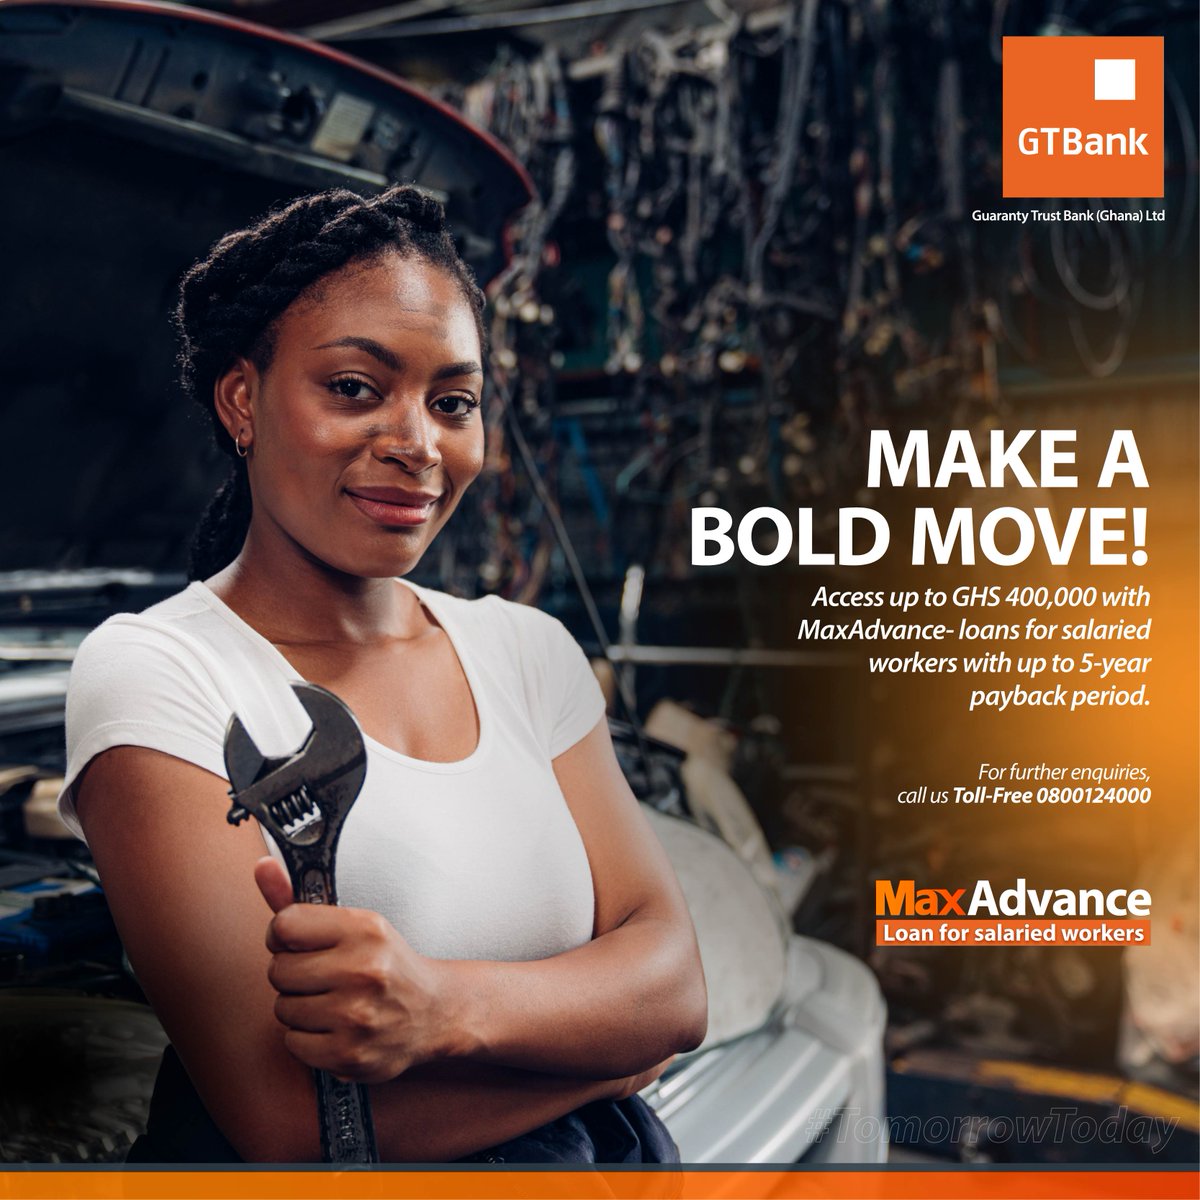 With reasonably low interest rates, MaxAdvance is your go-to loan to get finance for those projects that have been pending. Get in touch with your Relationship Manager or call us toll-free on 0800124000 to get started.
#GreatExperiences
#GTBankgh
#TomorrowToday